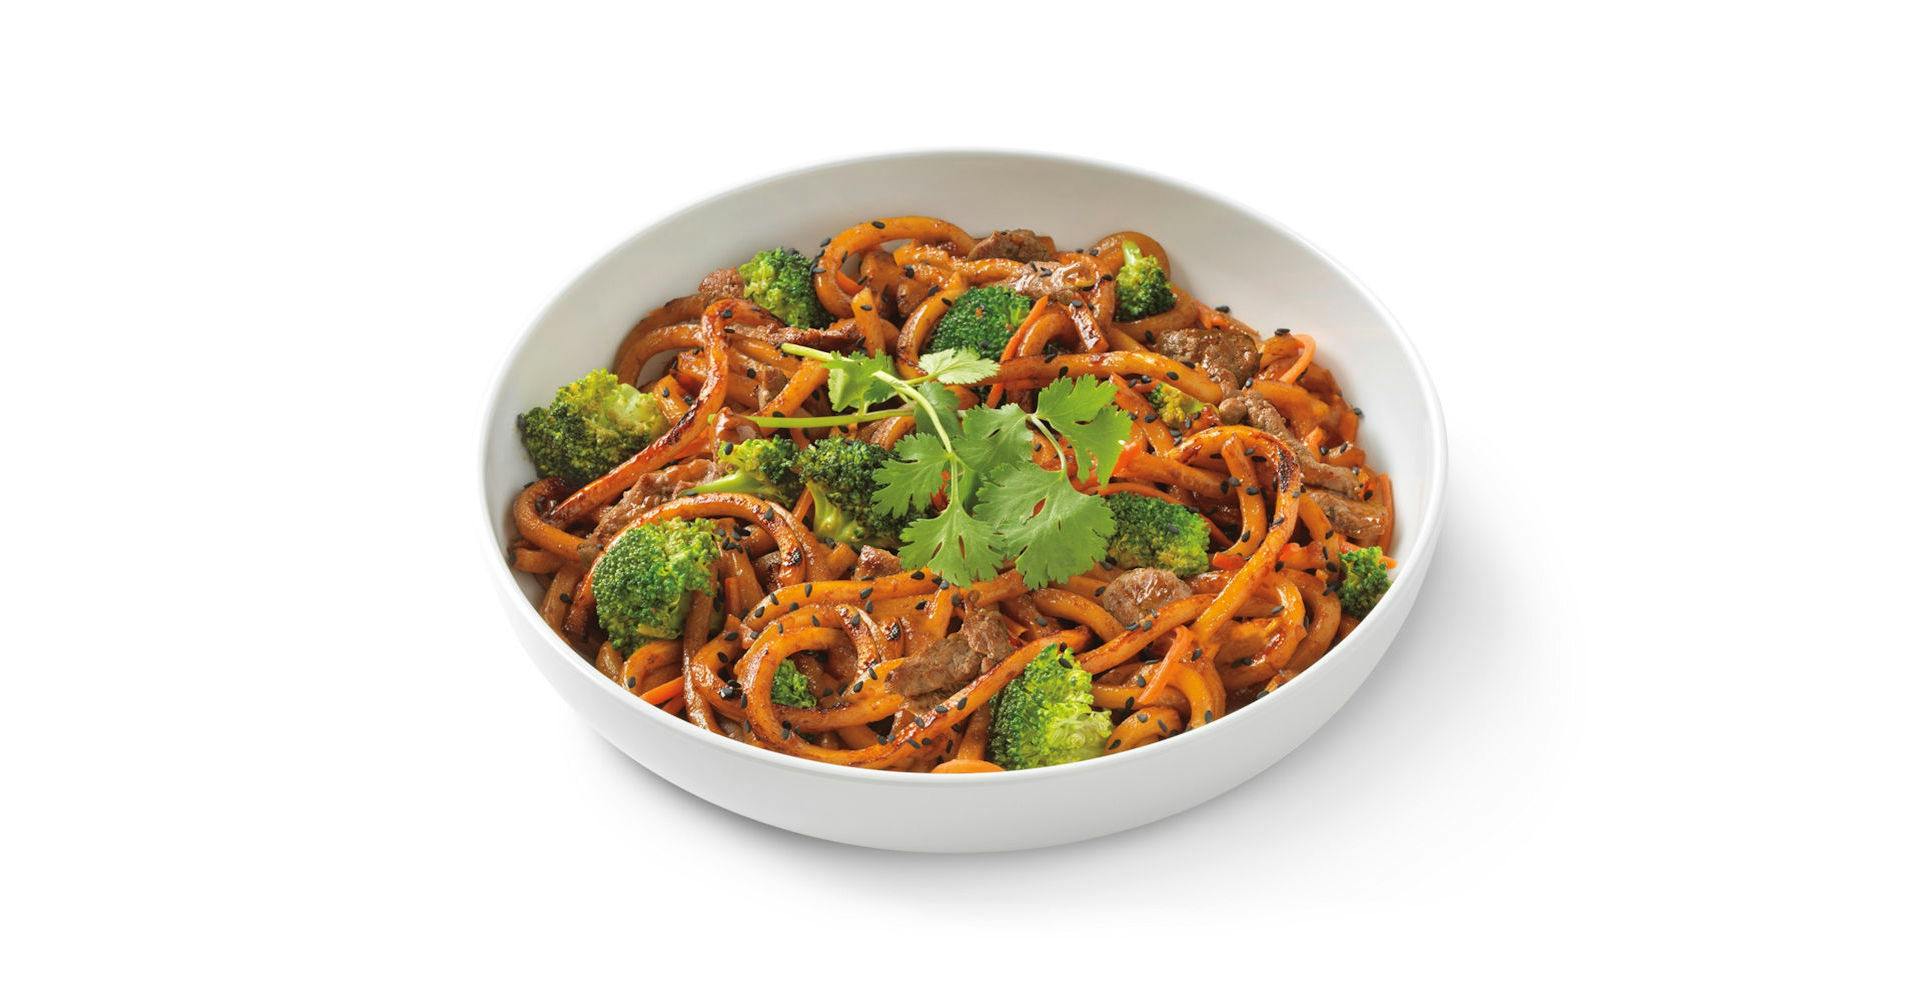 Japanese Pan Noodles with Marinated Steak from Noodles & Company - Milwaukee Miller Parkway in Milwaukee, WI